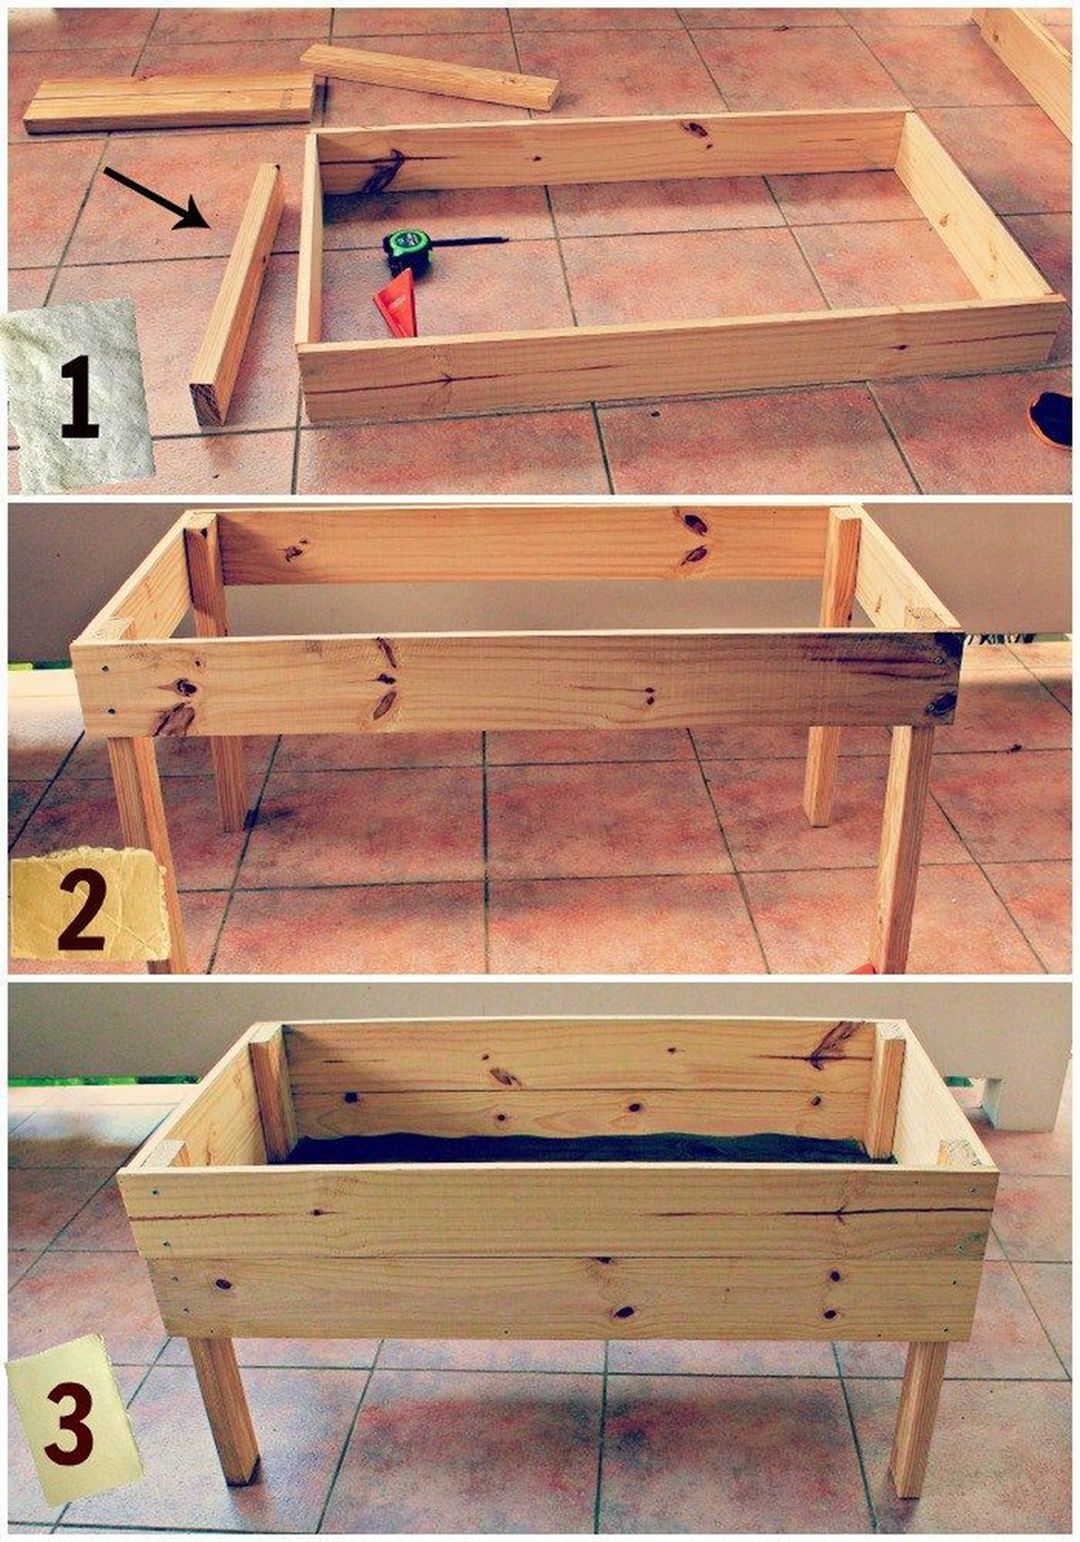 How To Build An Elevated Garden Box